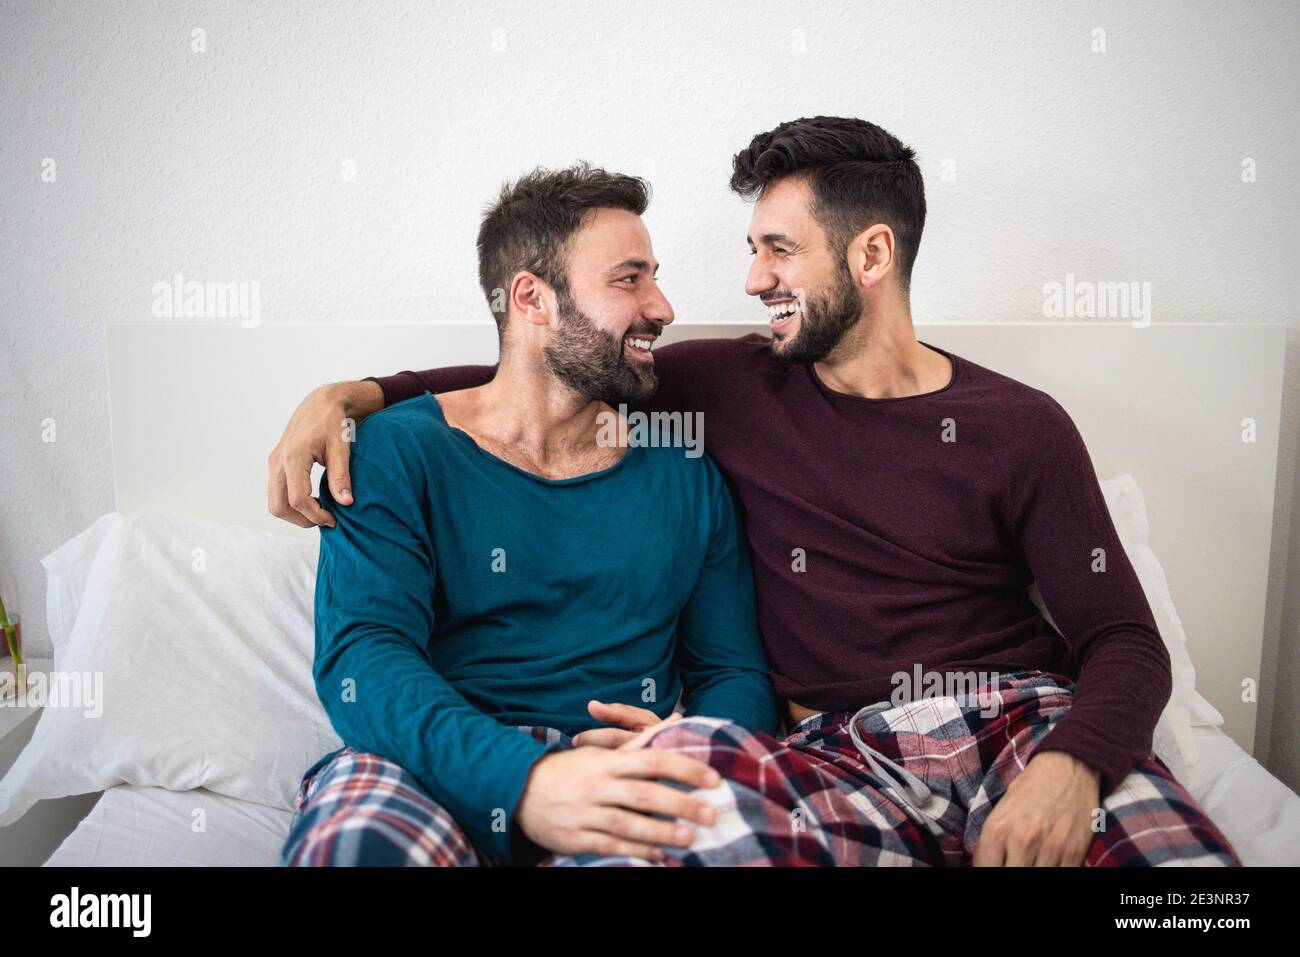 Happy gay men couple having tender moments together at home - Focus on right man Stock Photo